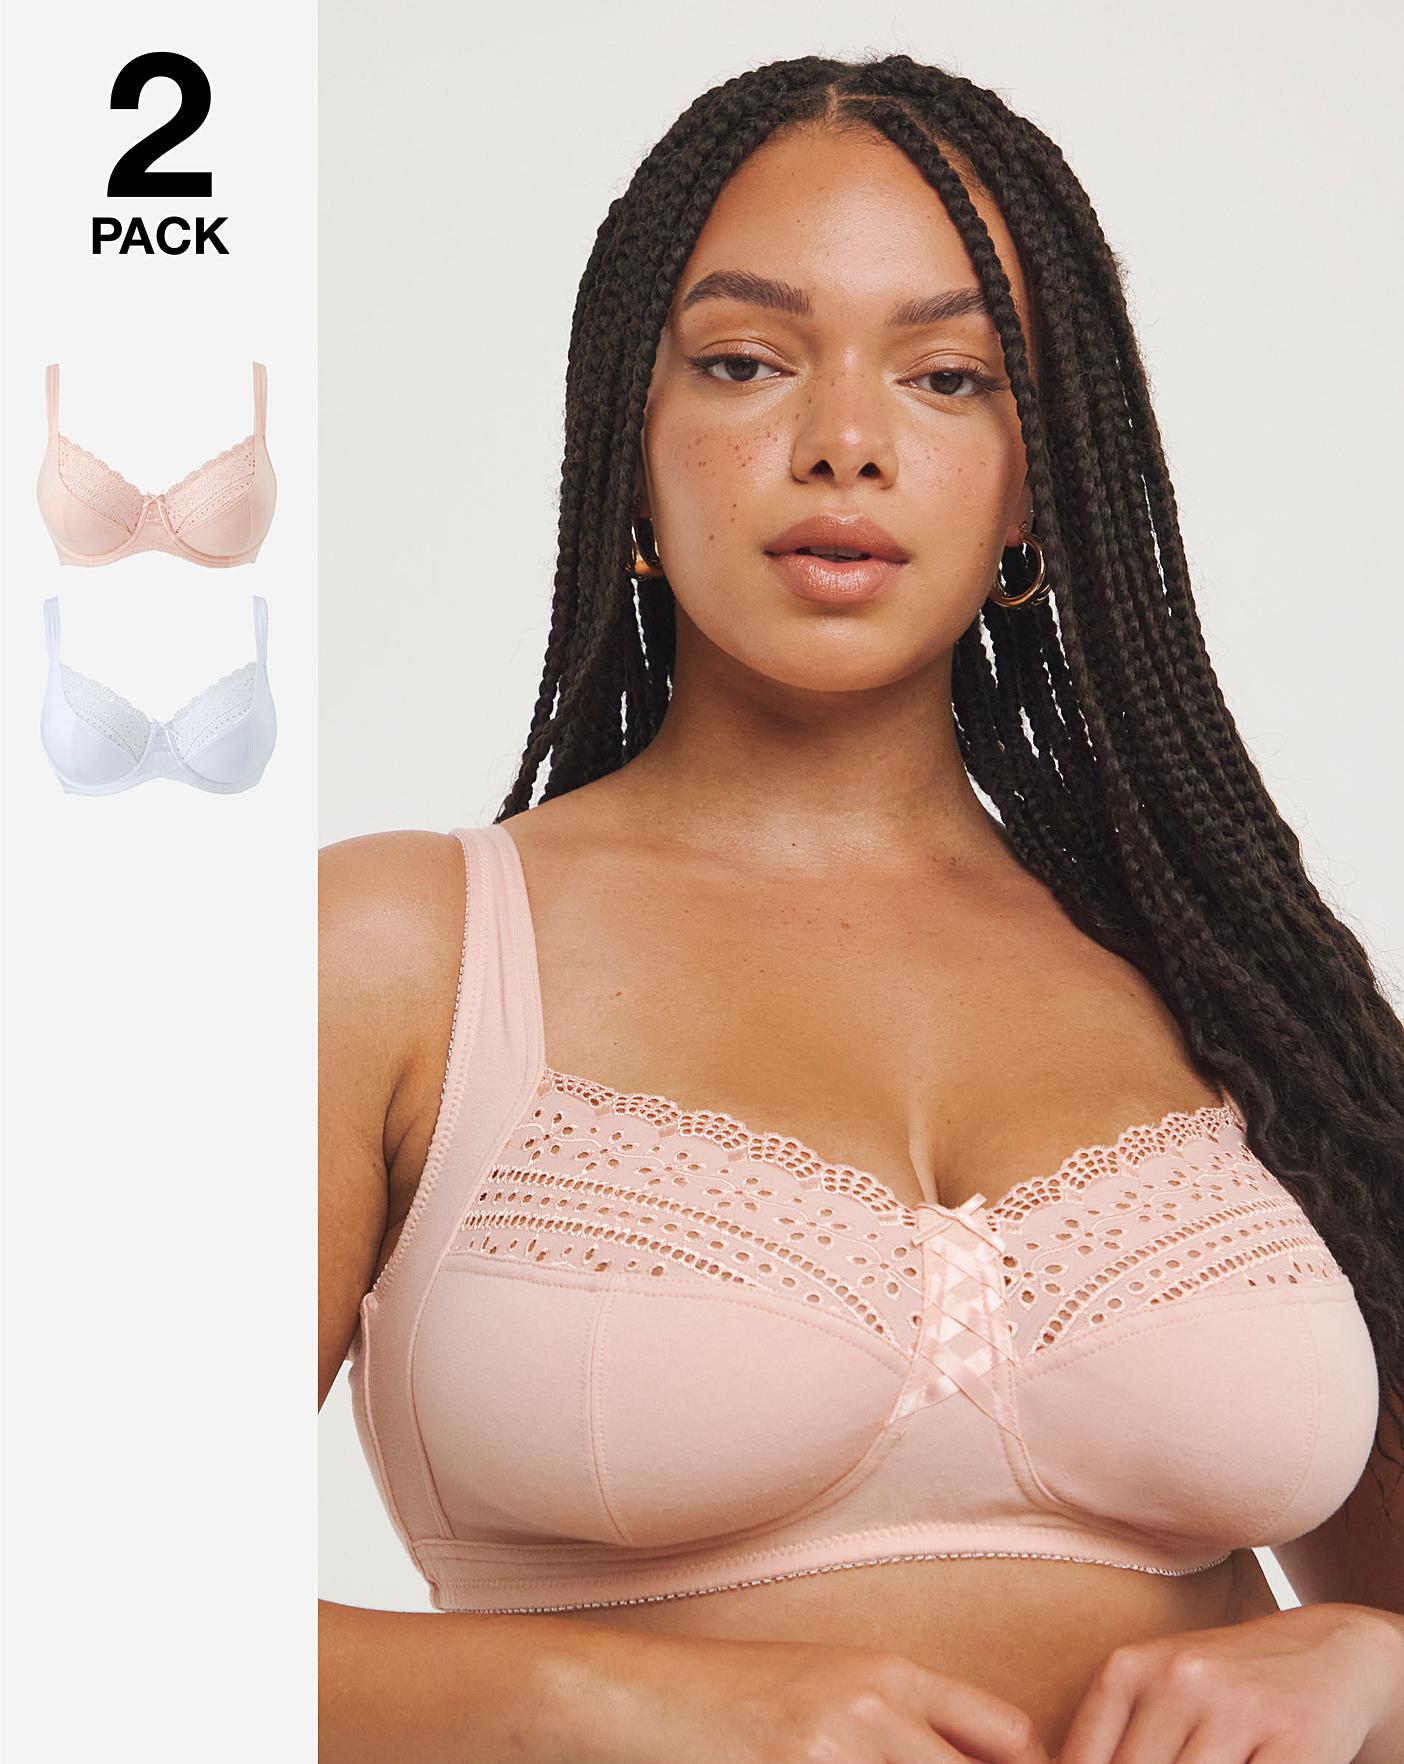 Broderie Anglaise non-wired cotton rich bra